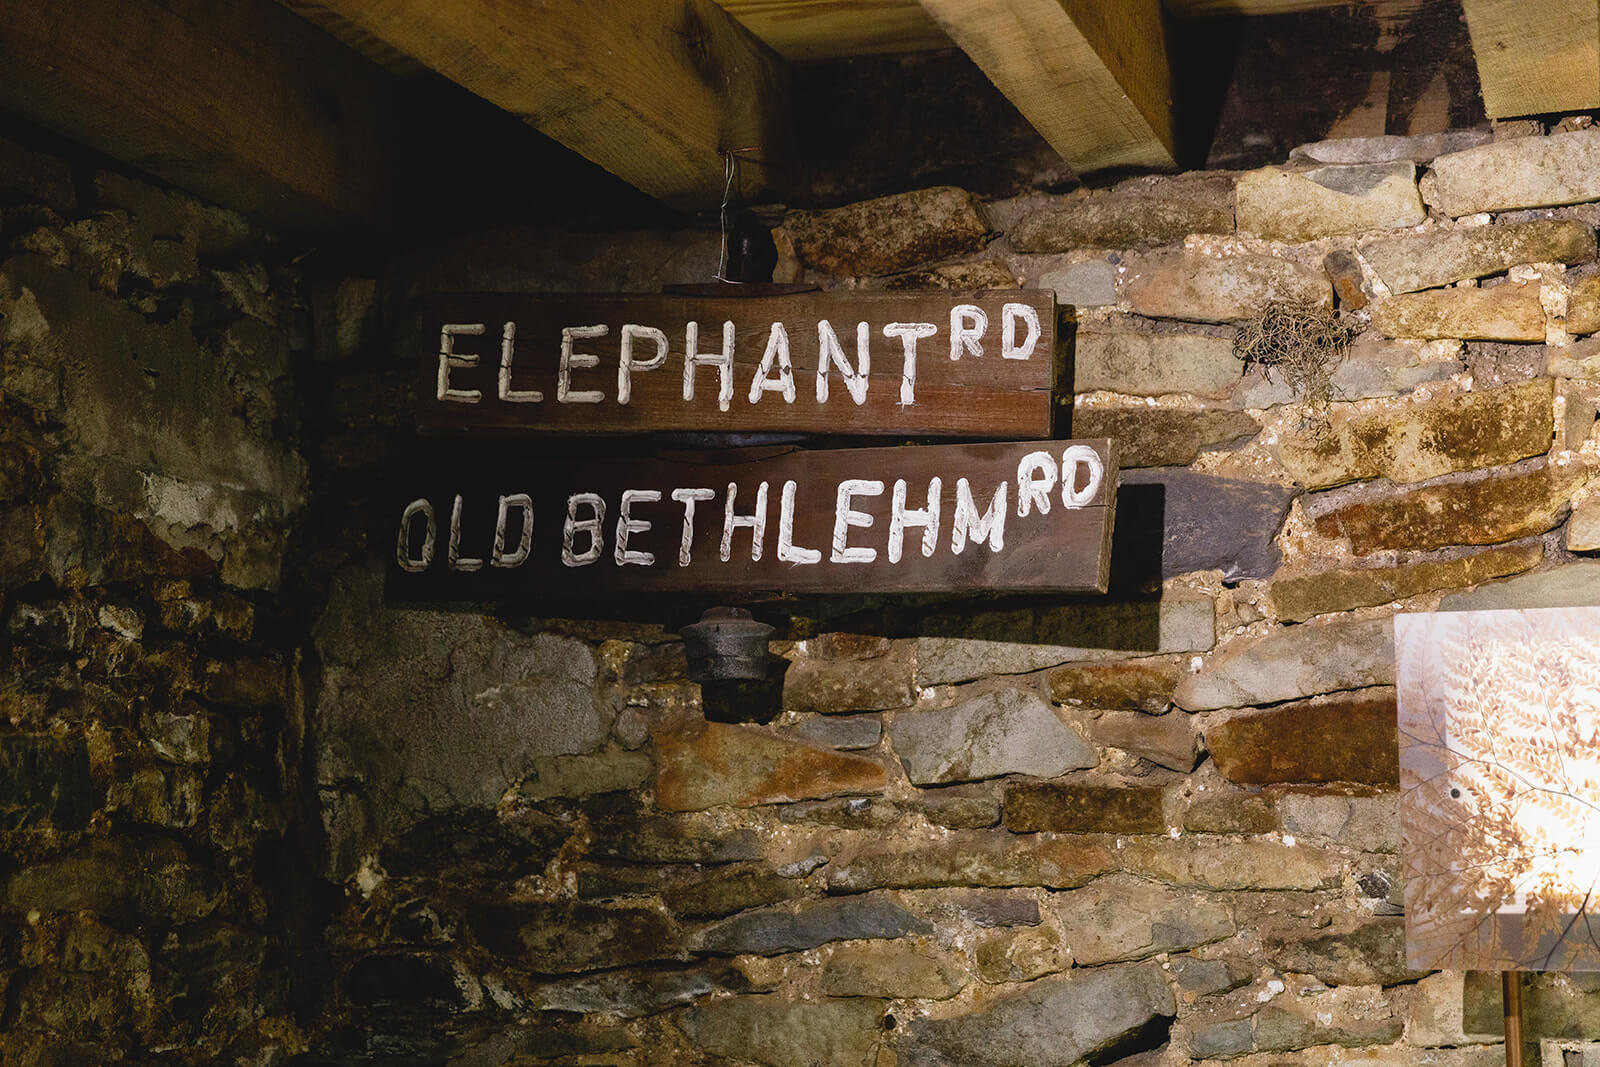 A sign that says elephant p and old bethlehem.